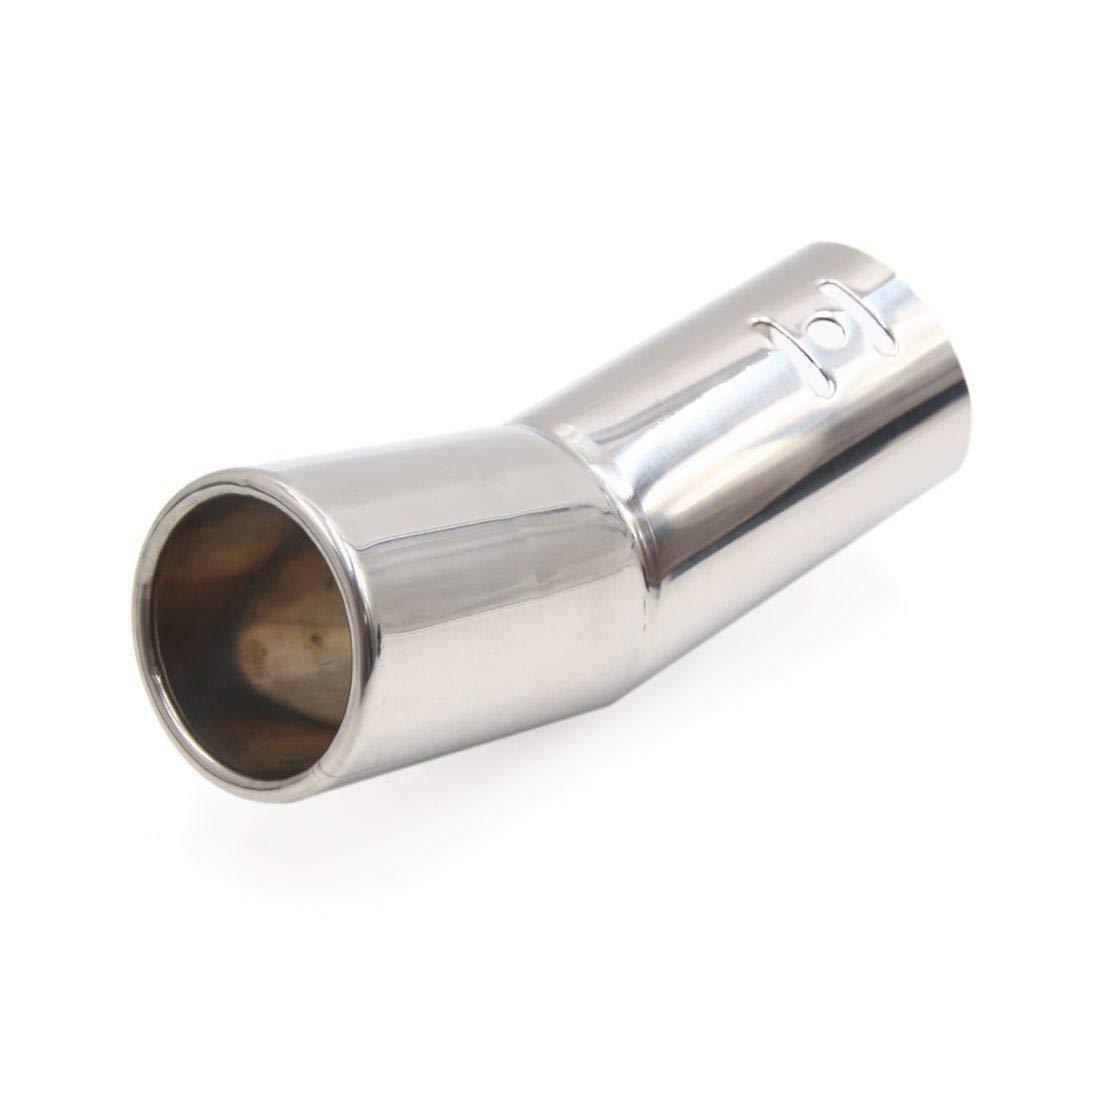 Car Exhaust Muffler Tip Show Pipe, Round Shape, Fit For Bent Exhaust Pipe,  Model-6062